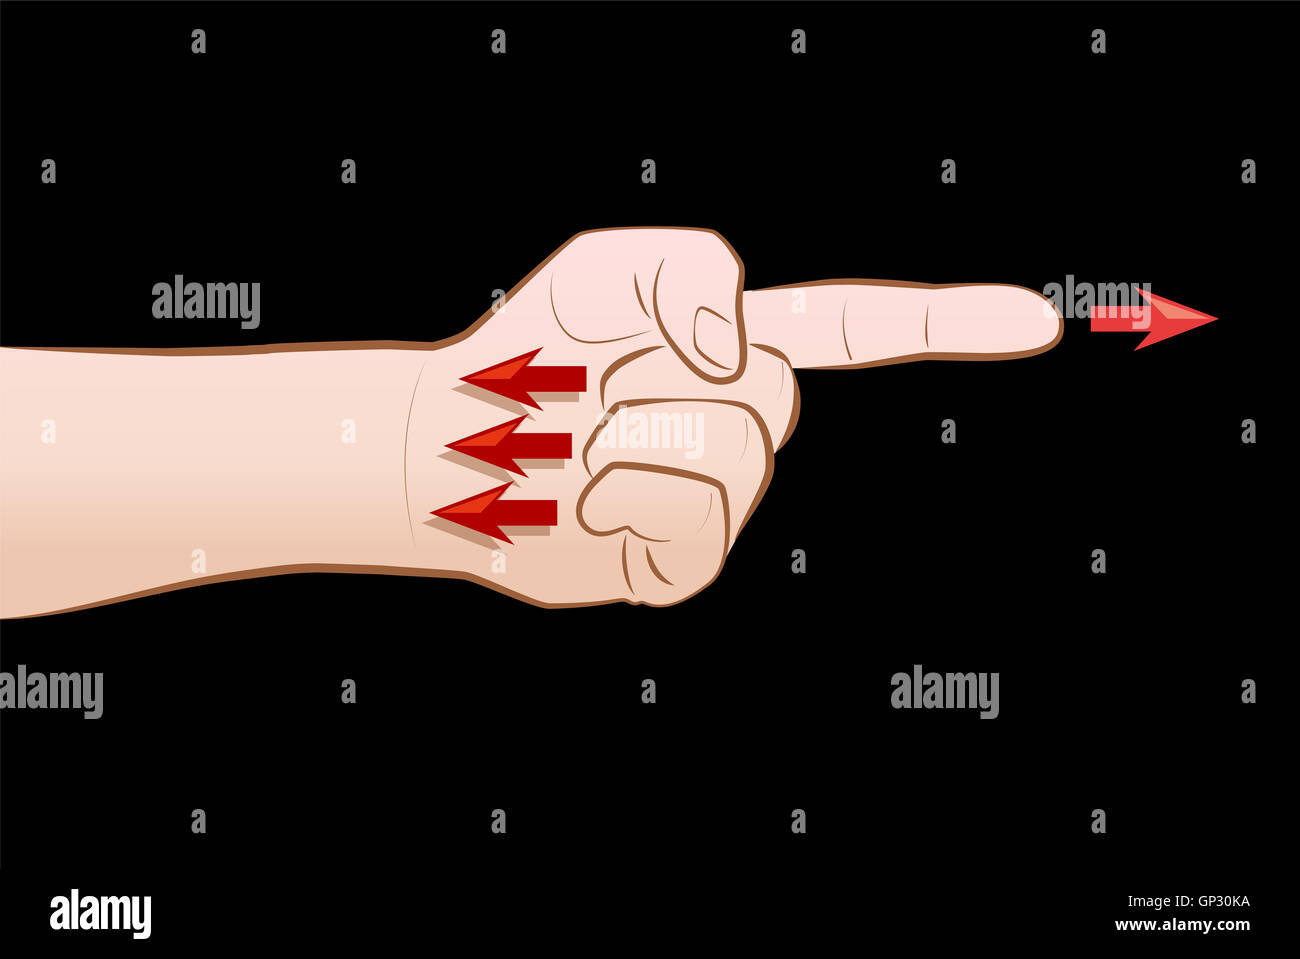 Accusation - When you point one finger, there are three fingers pointing back to you. Stock Photo